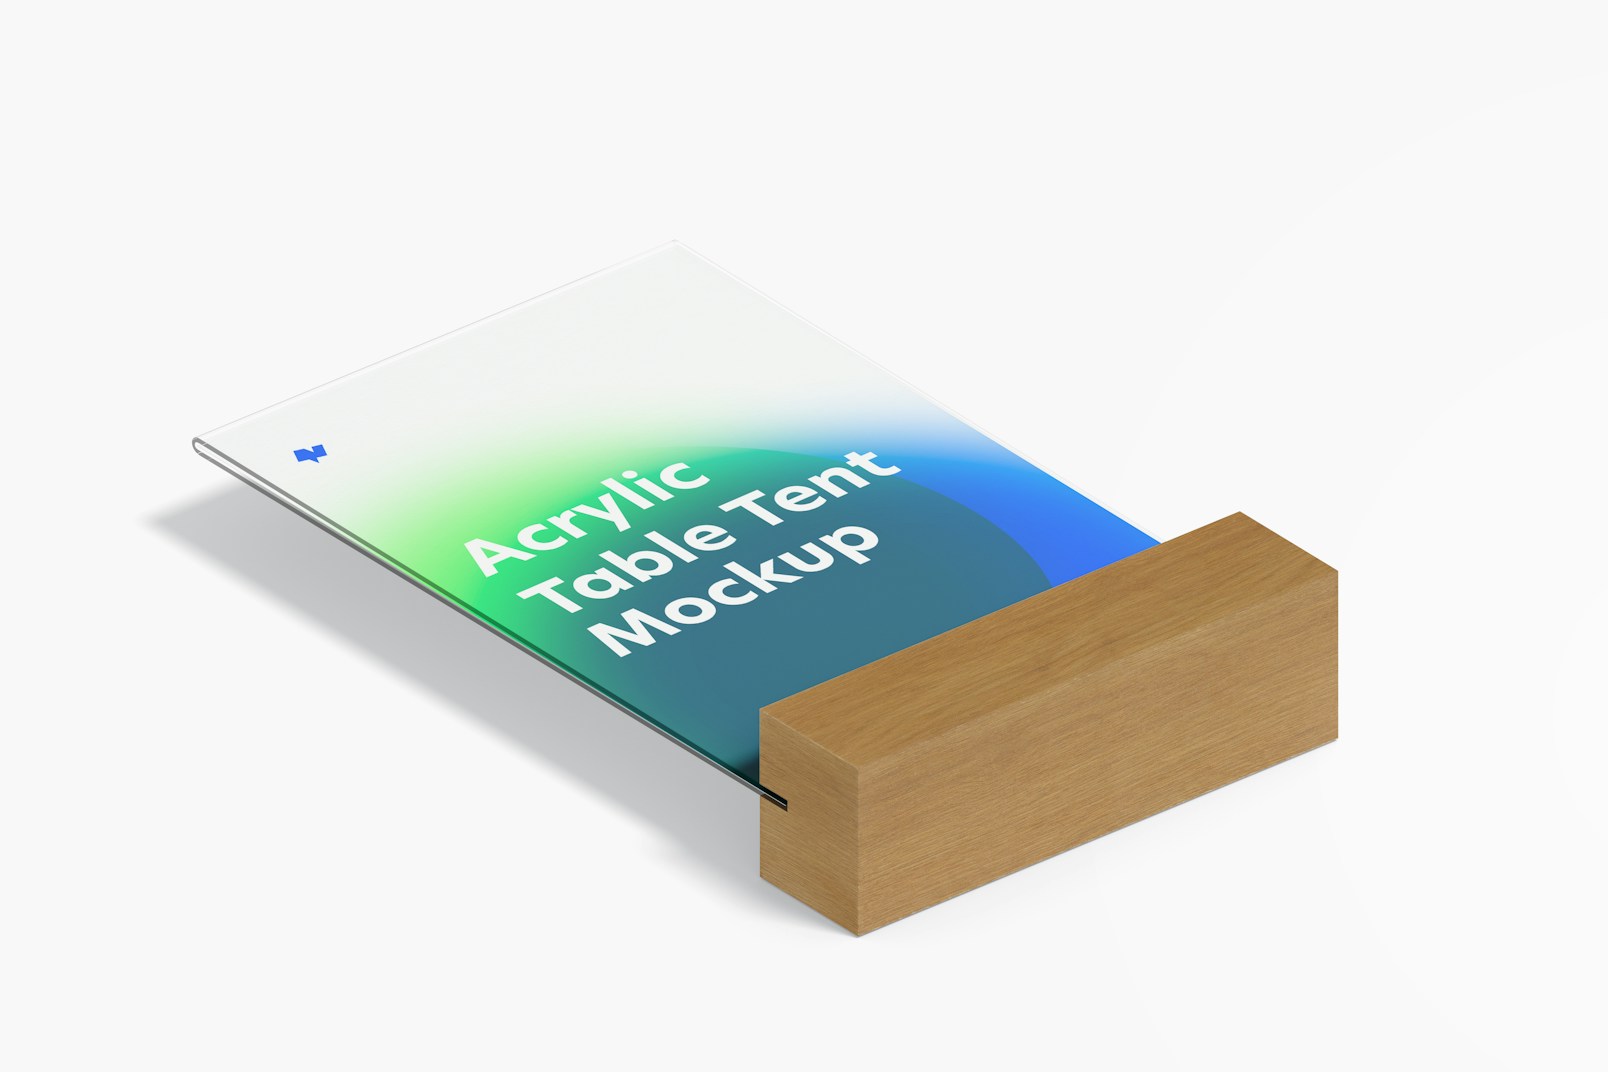 Acrylic Table Tent with Wood Base Mockup, Isometric View